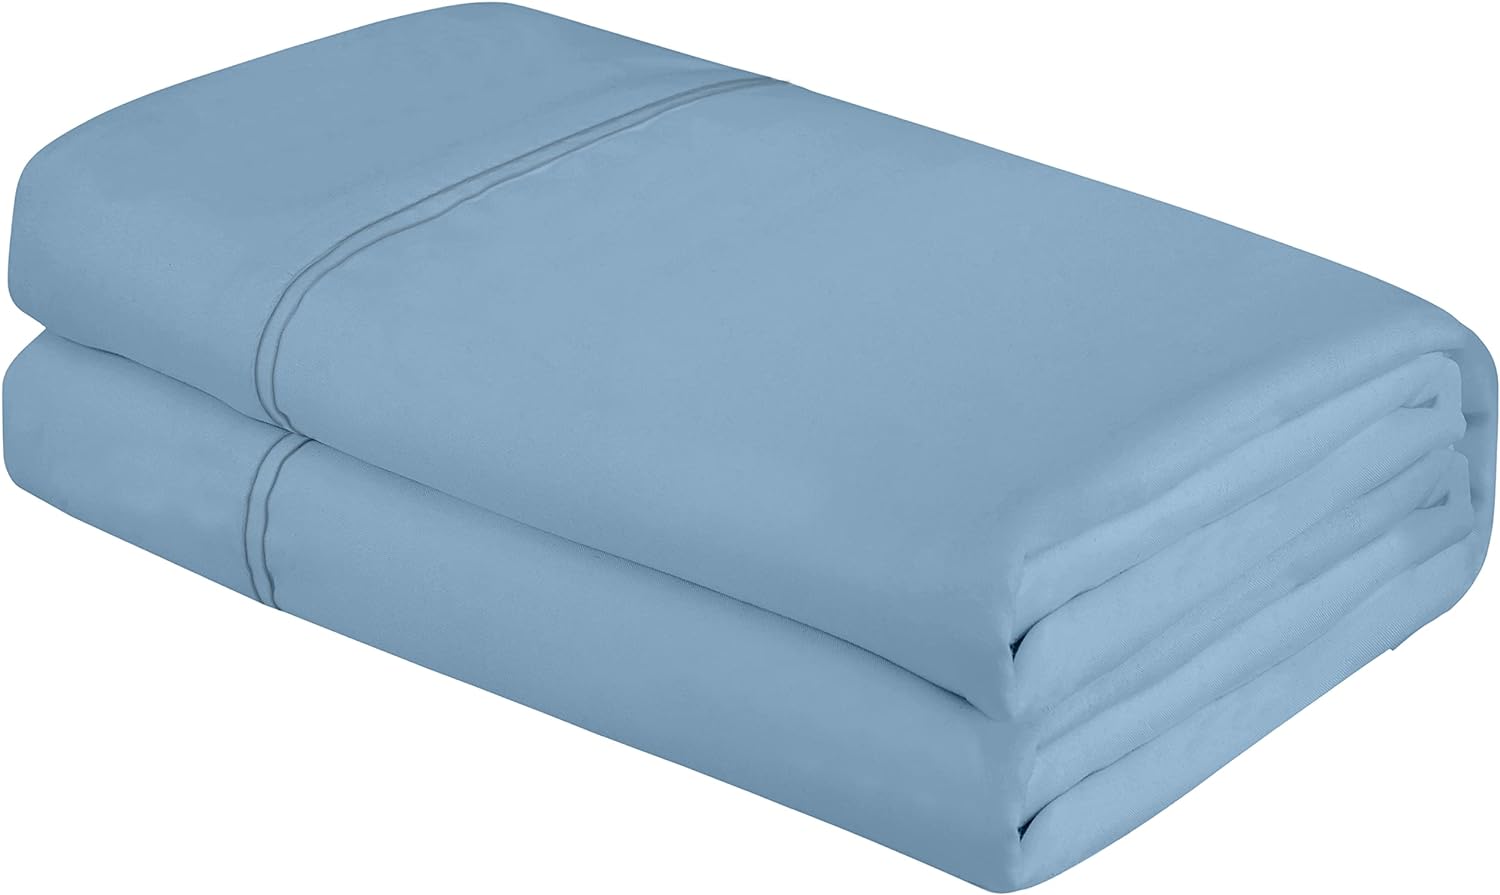 Royale Linens Queen Size Flat Sheet Only - Brushed 1800 Microfiber - Ultra Soft & Breathable - Wrinkle & Stain Resistant - Hotel Quality Flat Sheet Sold Separately - Top Sheet For Bed (Queen,LakeBlue)